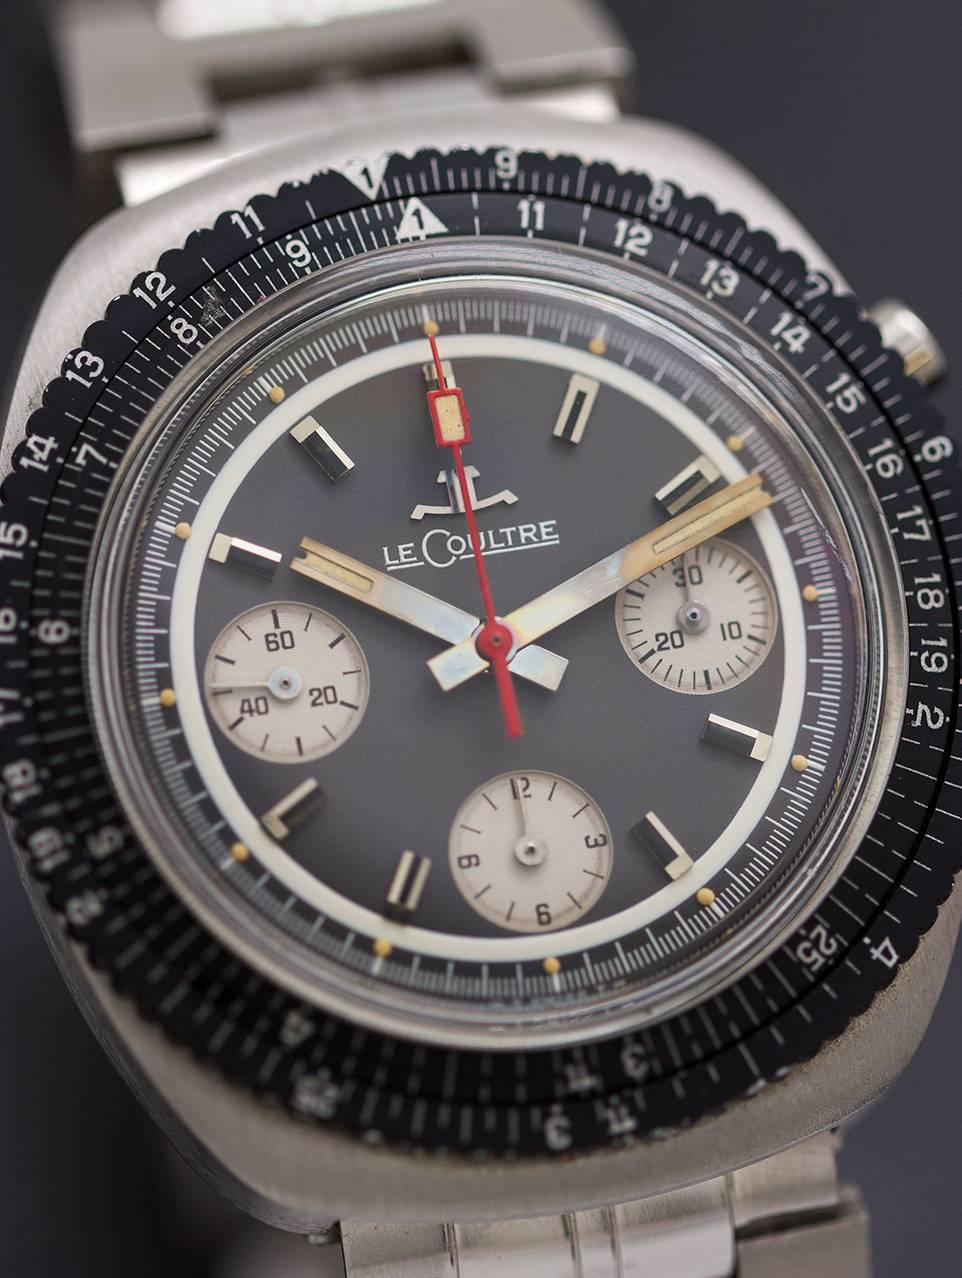 Lecoultre stainless steel Calculator Chronograph manual wind wristwatch, c1960s 2